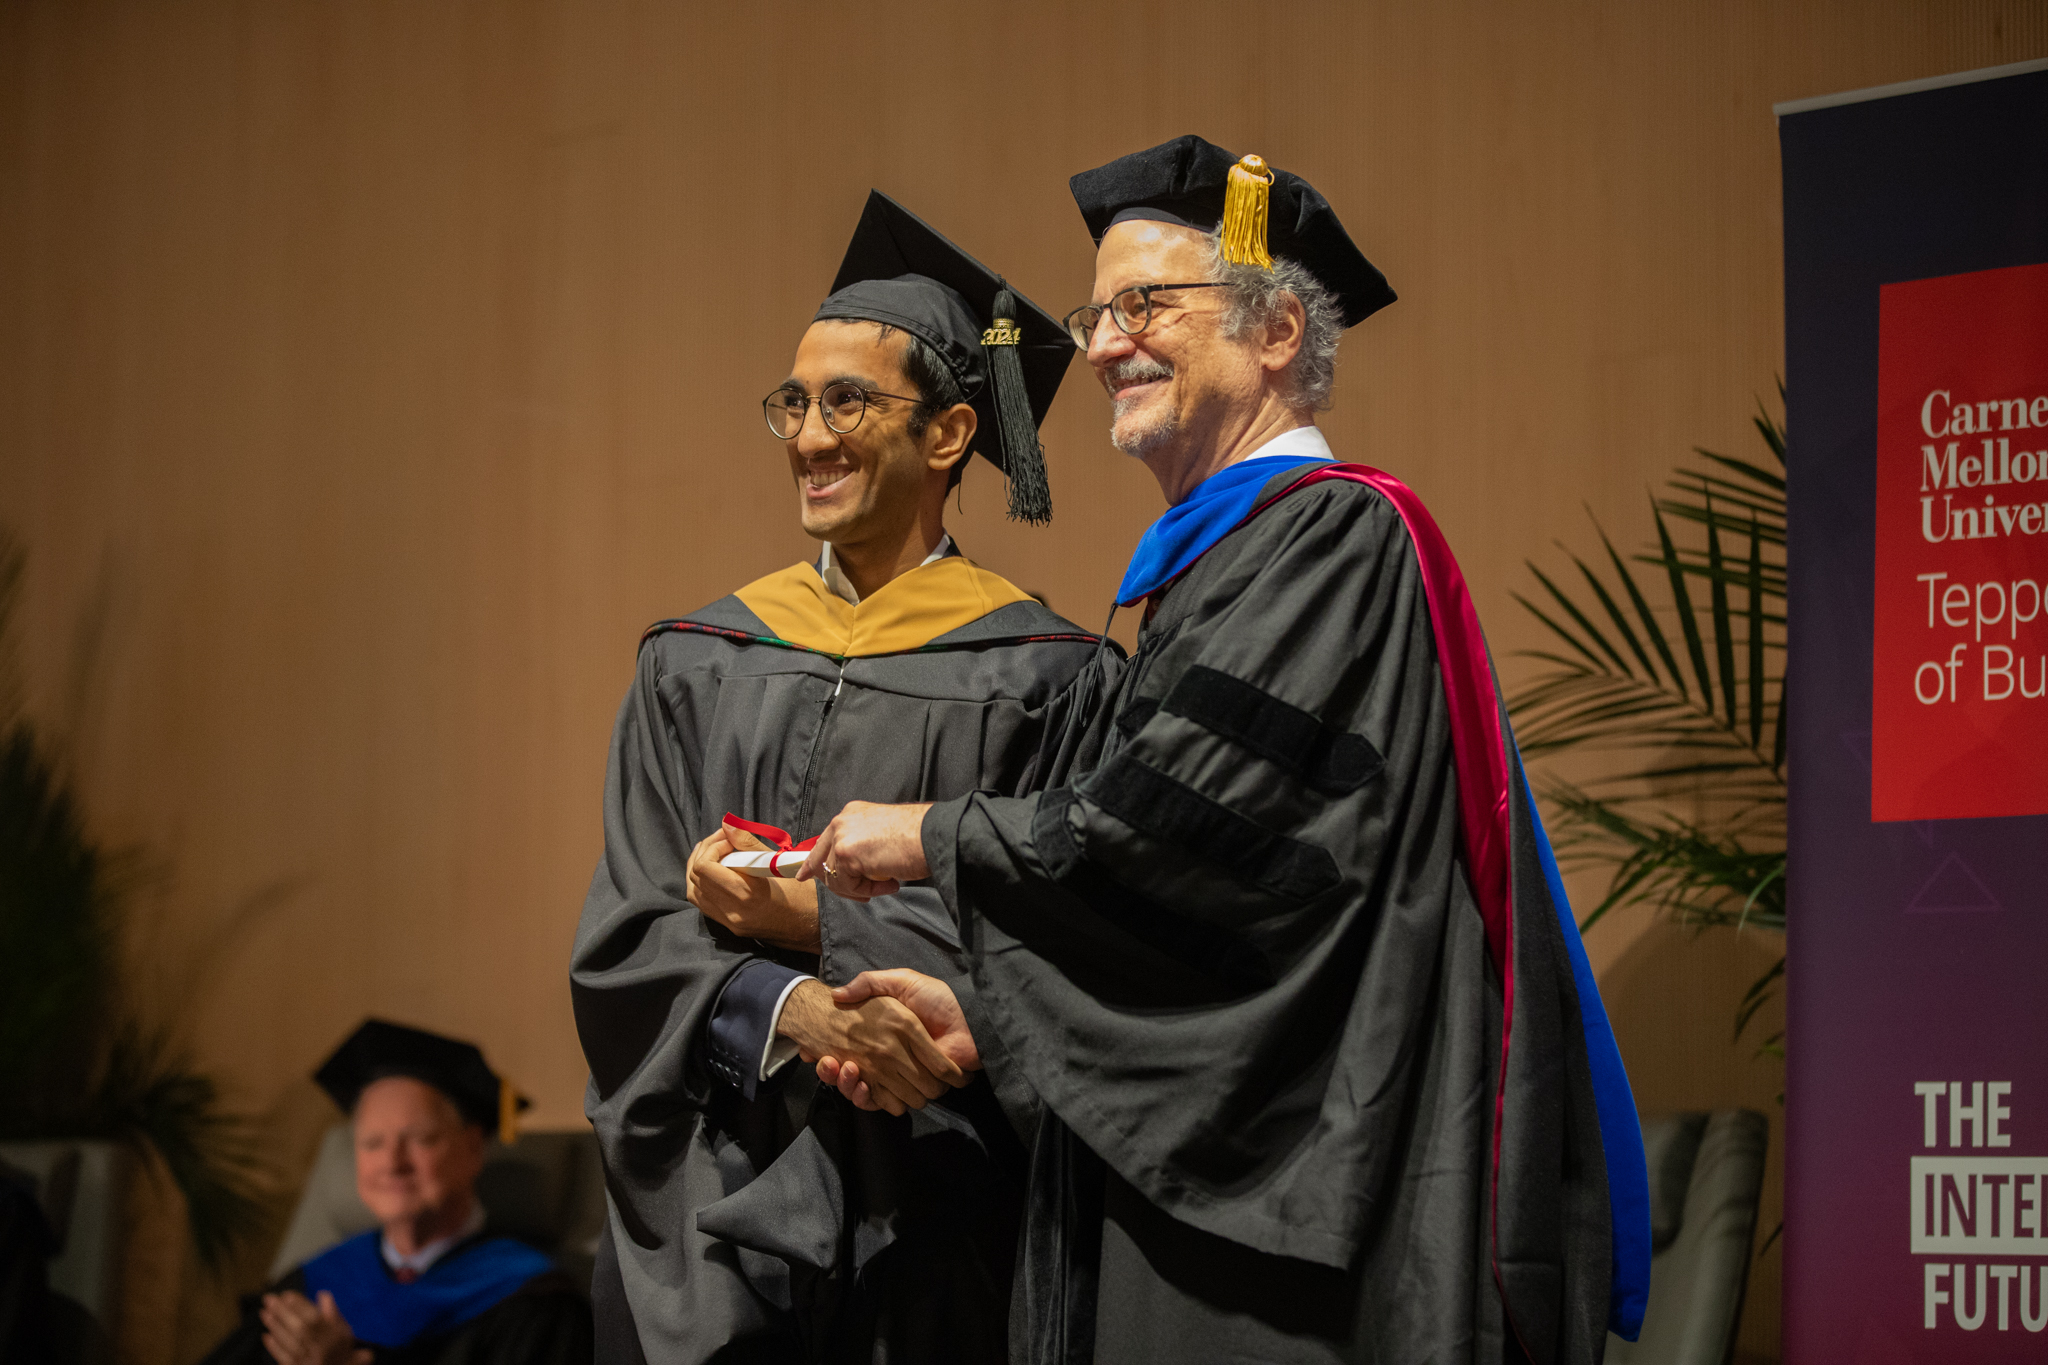 Dr. Seppi poses with student at commencement